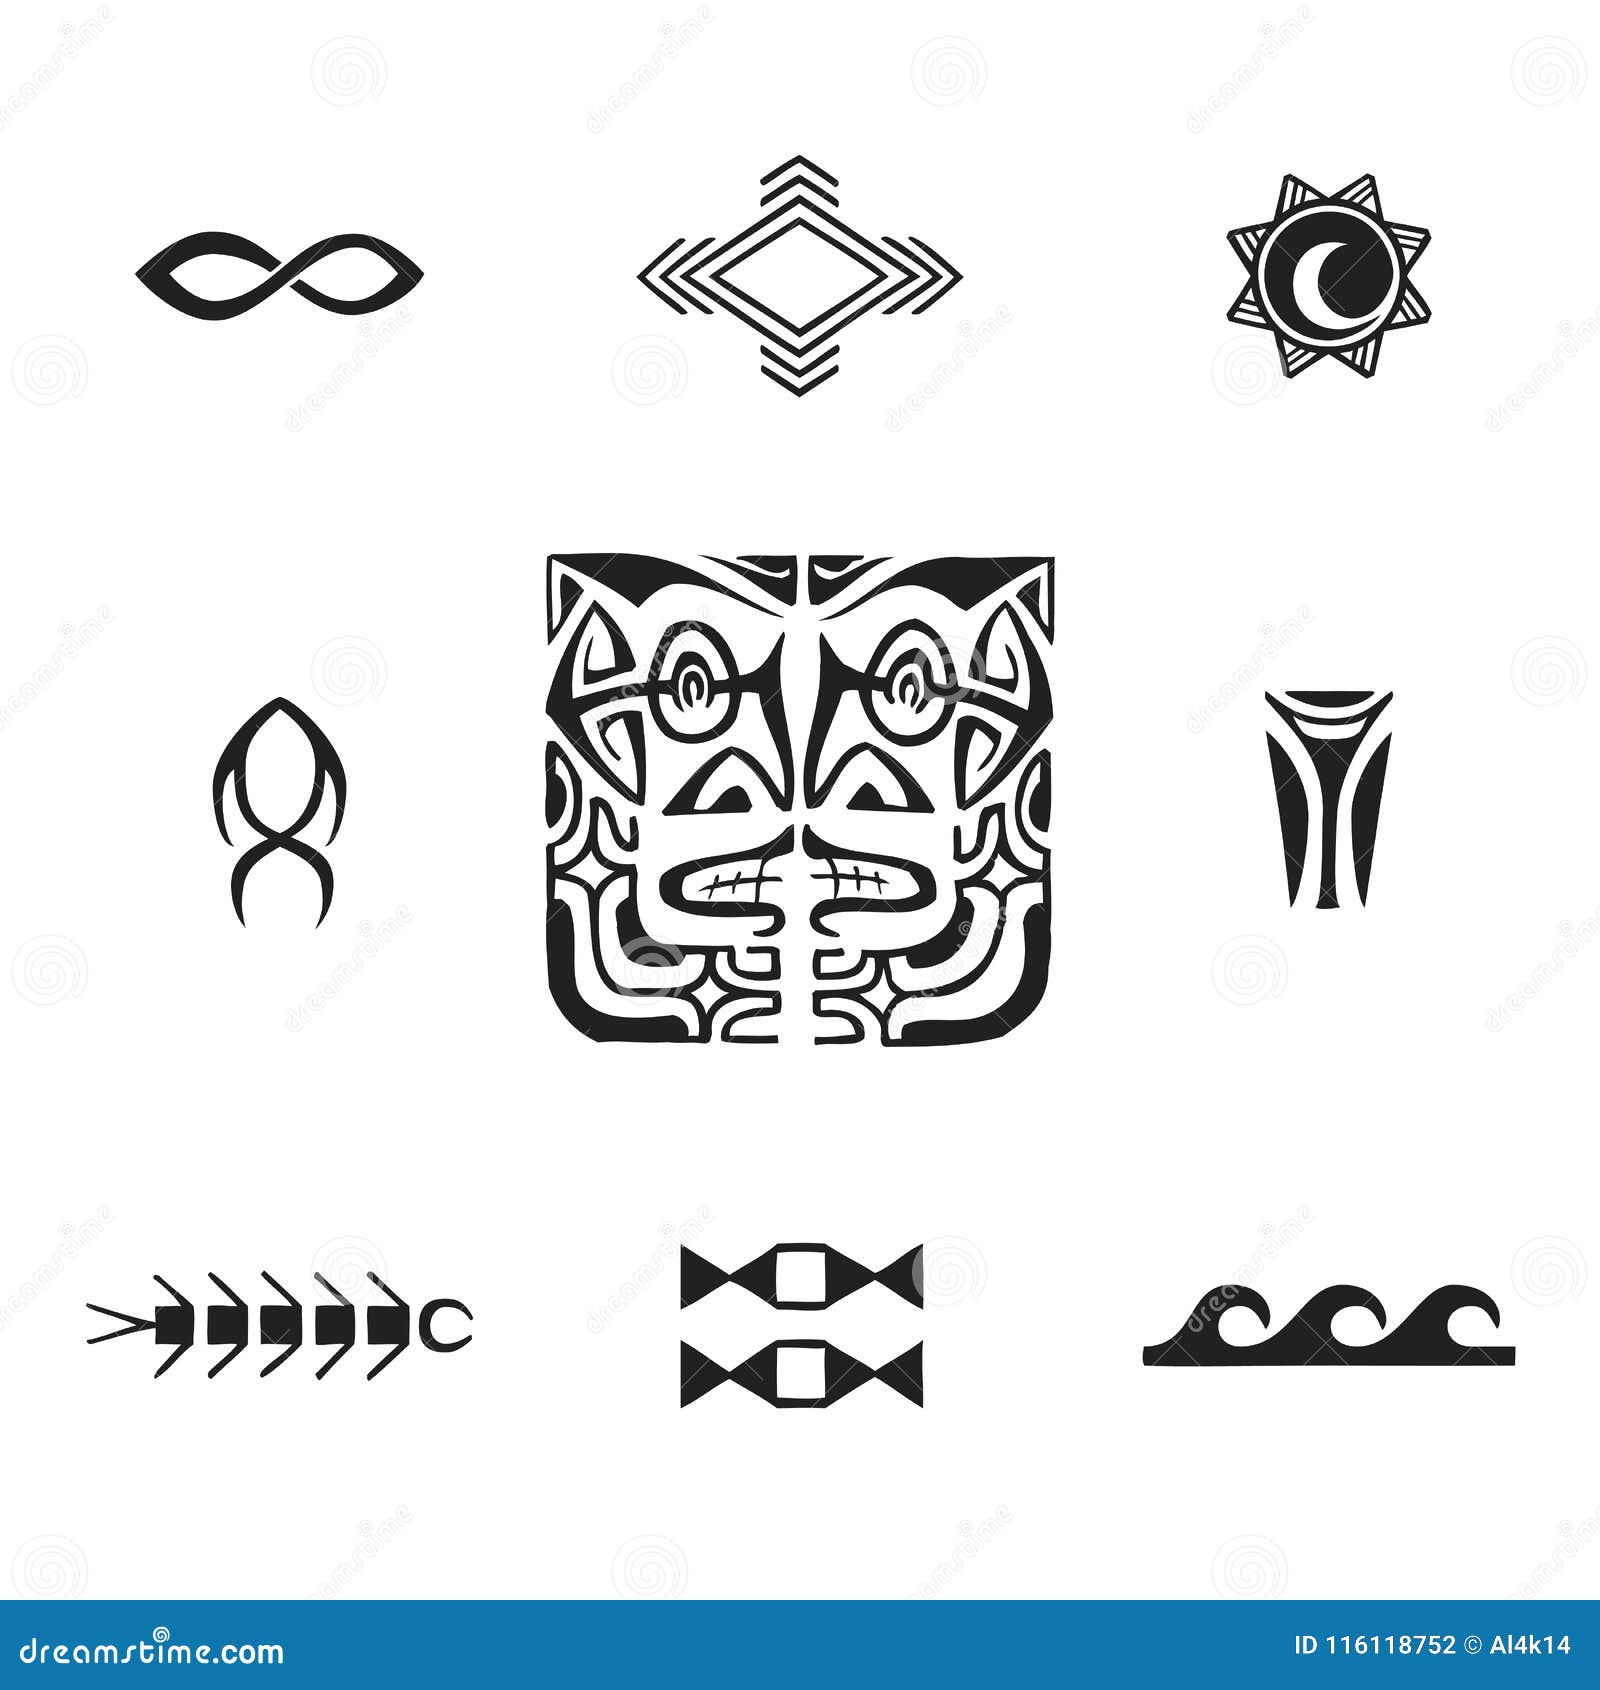 Polynesian Tattoo Symbols  Meanings  Marquesan Cross  ClipArt Best   ClipArt Best